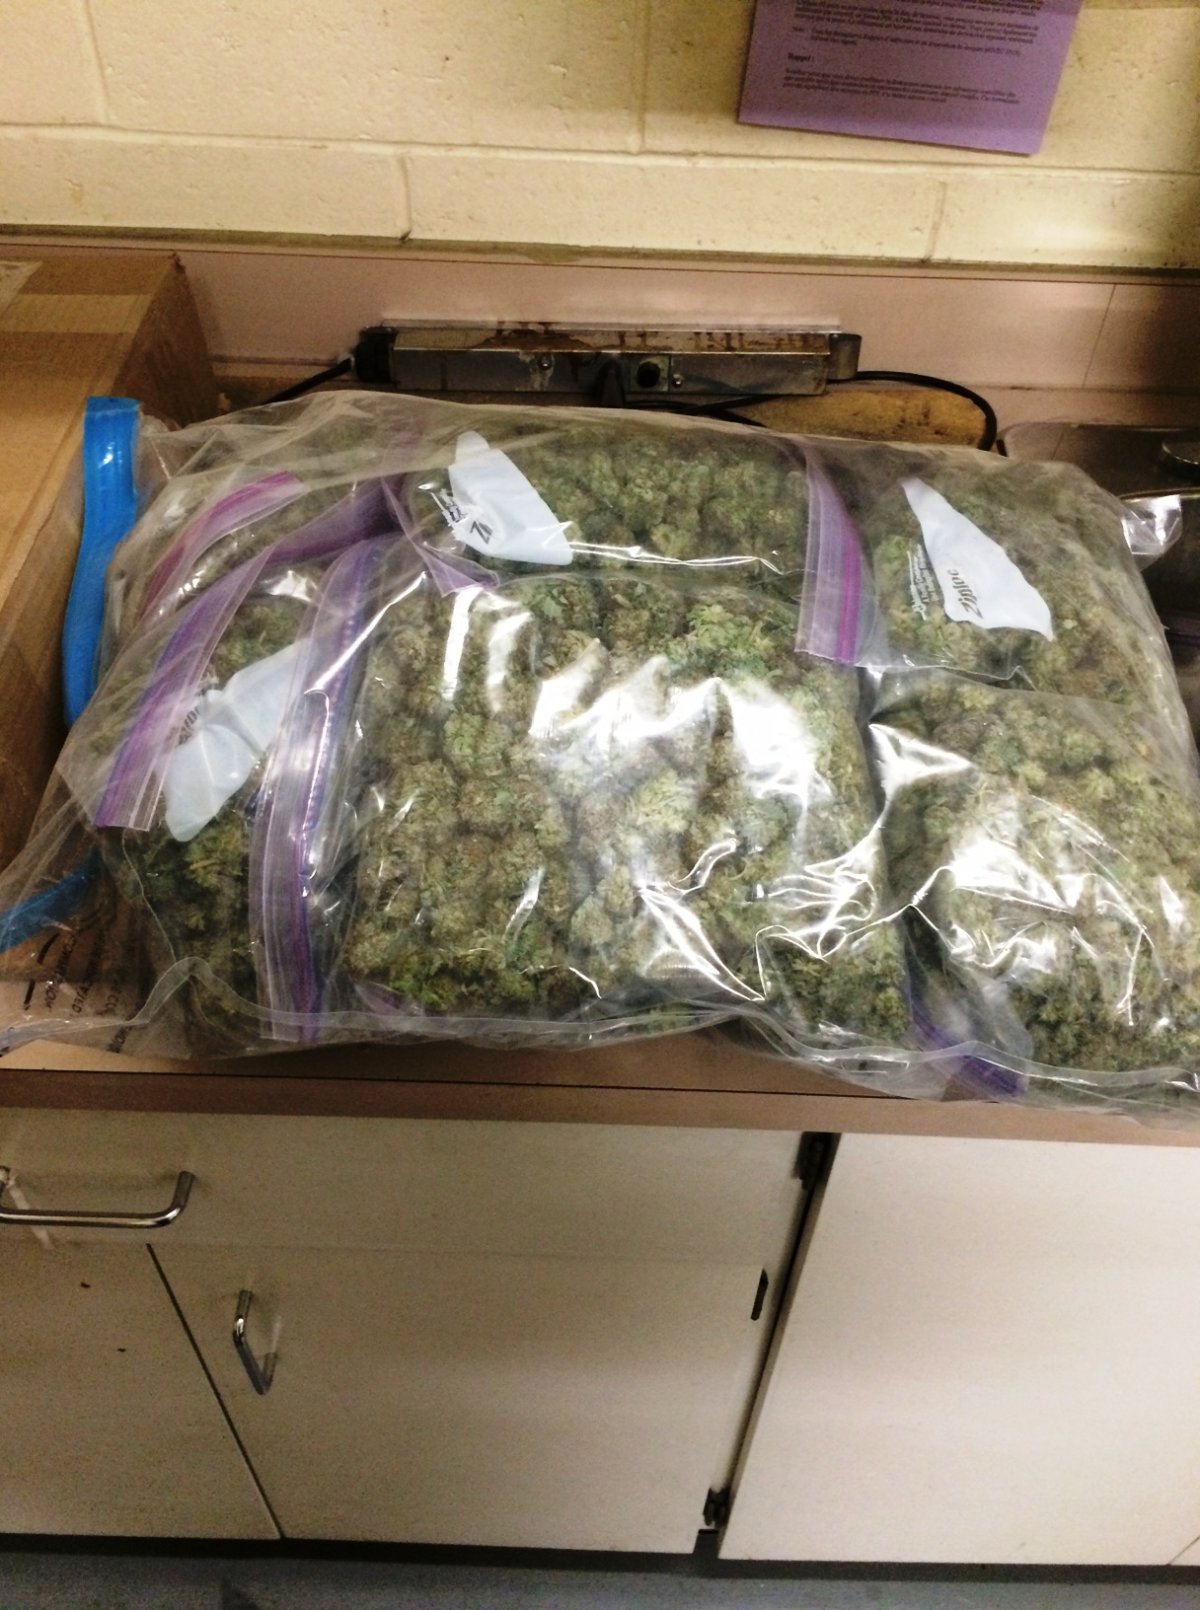 RCMP have charged a 24-year-old Regina man after discovering $23,000 of marijuana in his vehicle.